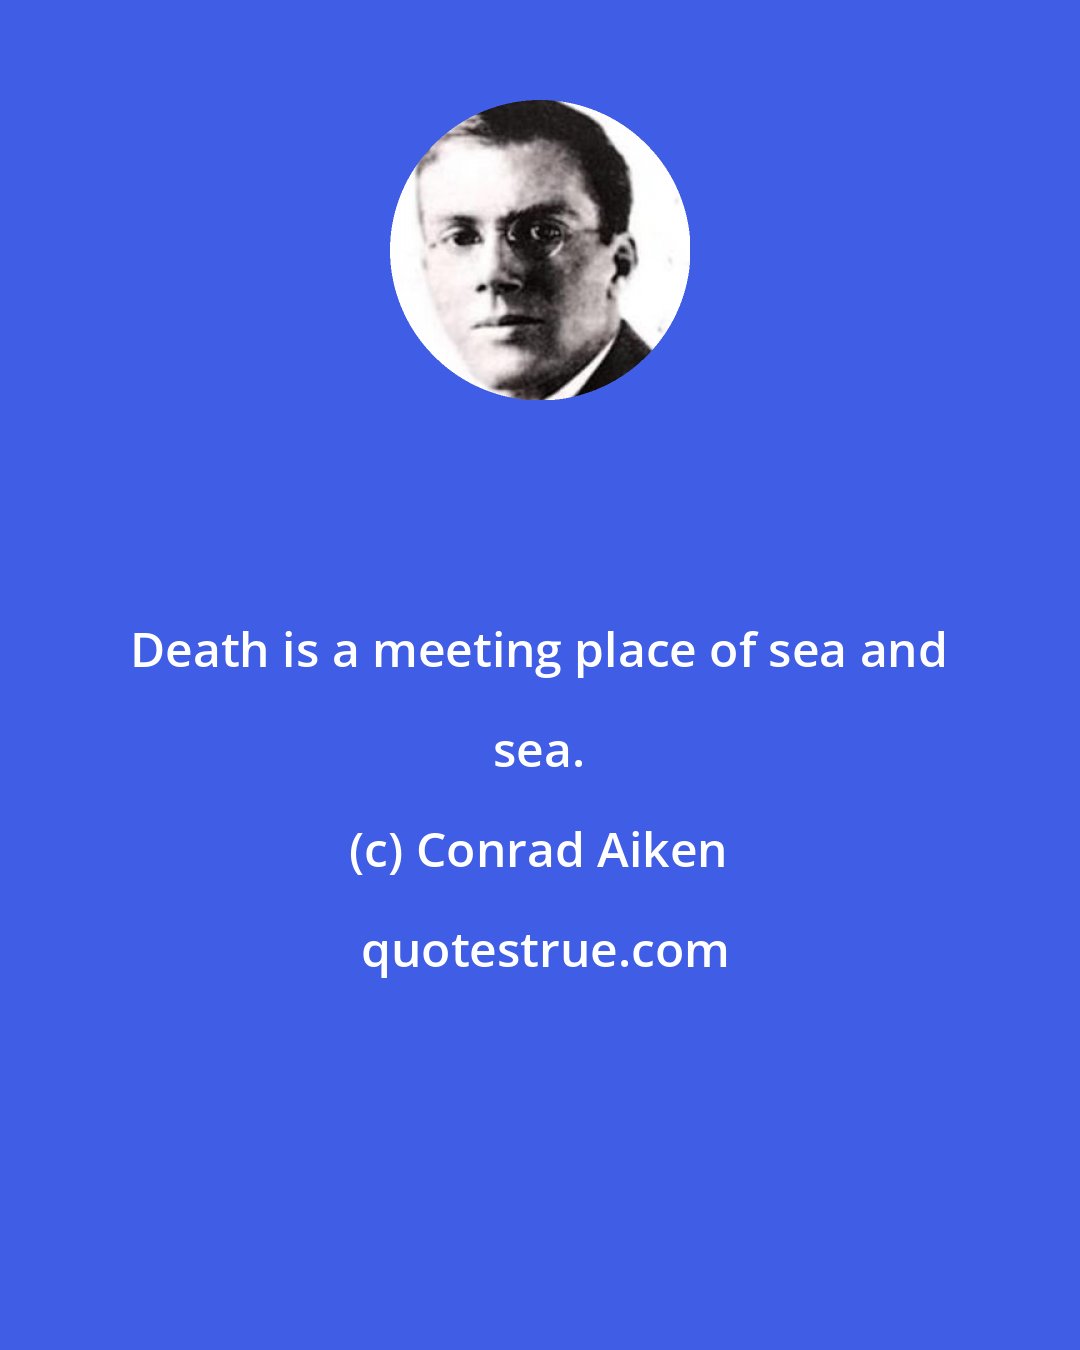 Conrad Aiken: Death is a meeting place of sea and sea.